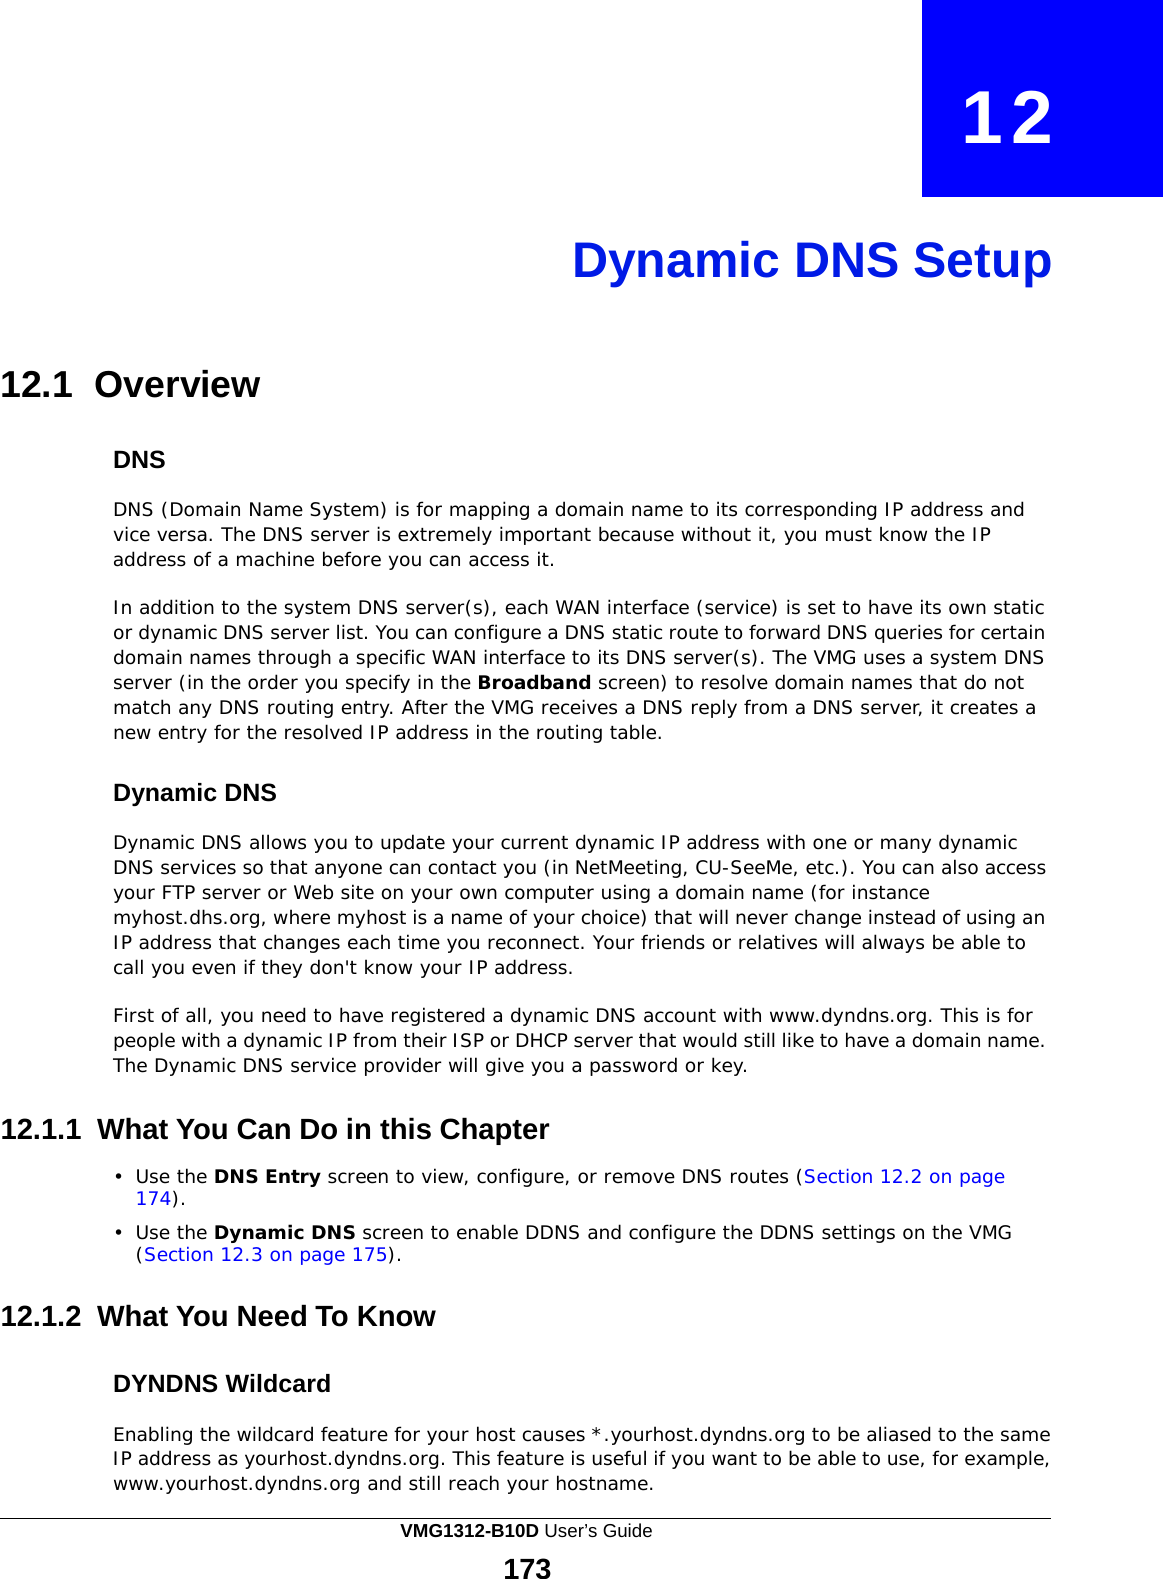  12     Dynamic DNS Setup     12.1 Overview   DNS  DNS (Domain Name System) is for mapping a domain name to its corresponding IP address and vice versa. The DNS server is extremely important because without it, you must know the IP address of a machine before you can access it.  In addition to the system DNS server(s), each WAN interface (service) is set to have its own static or dynamic DNS server list. You can configure a DNS static route to forward DNS queries for certain domain names through a specific WAN interface to its DNS server(s). The VMG uses a system DNS server (in the order you specify in the Broadband screen) to resolve domain names that do not match any DNS routing entry. After the VMG receives a DNS reply from a DNS server, it creates a new entry for the resolved IP address in the routing table.   Dynamic DNS  Dynamic DNS allows you to update your current dynamic IP address with one or many dynamic DNS services so that anyone can contact you (in NetMeeting, CU-SeeMe, etc.). You can also access your FTP server or Web site on your own computer using a domain name (for instance myhost.dhs.org, where myhost is a name of your choice) that will never change instead of using an IP address that changes each time you reconnect. Your friends or relatives will always be able to call you even if they don&apos;t know your IP address.  First of all, you need to have registered a dynamic DNS account with www.dyndns.org. This is for people with a dynamic IP from their ISP or DHCP server that would still like to have a domain name. The Dynamic DNS service provider will give you a password or key.   12.1.1 What You Can Do in this Chapter  •  Use the DNS Entry screen to view, configure, or remove DNS routes (Section 12.2 on page 174).  •  Use the Dynamic DNS screen to enable DDNS and configure the DDNS settings on the VMG (Section 12.3 on page 175).   12.1.2 What You Need To Know   DYNDNS Wildcard  Enabling the wildcard feature for your host causes *.yourhost.dyndns.org to be aliased to the same IP address as yourhost.dyndns.org. This feature is useful if you want to be able to use, for example, www.yourhost.dyndns.org and still reach your hostname. VMG1312-B10D User’s Guide 173  